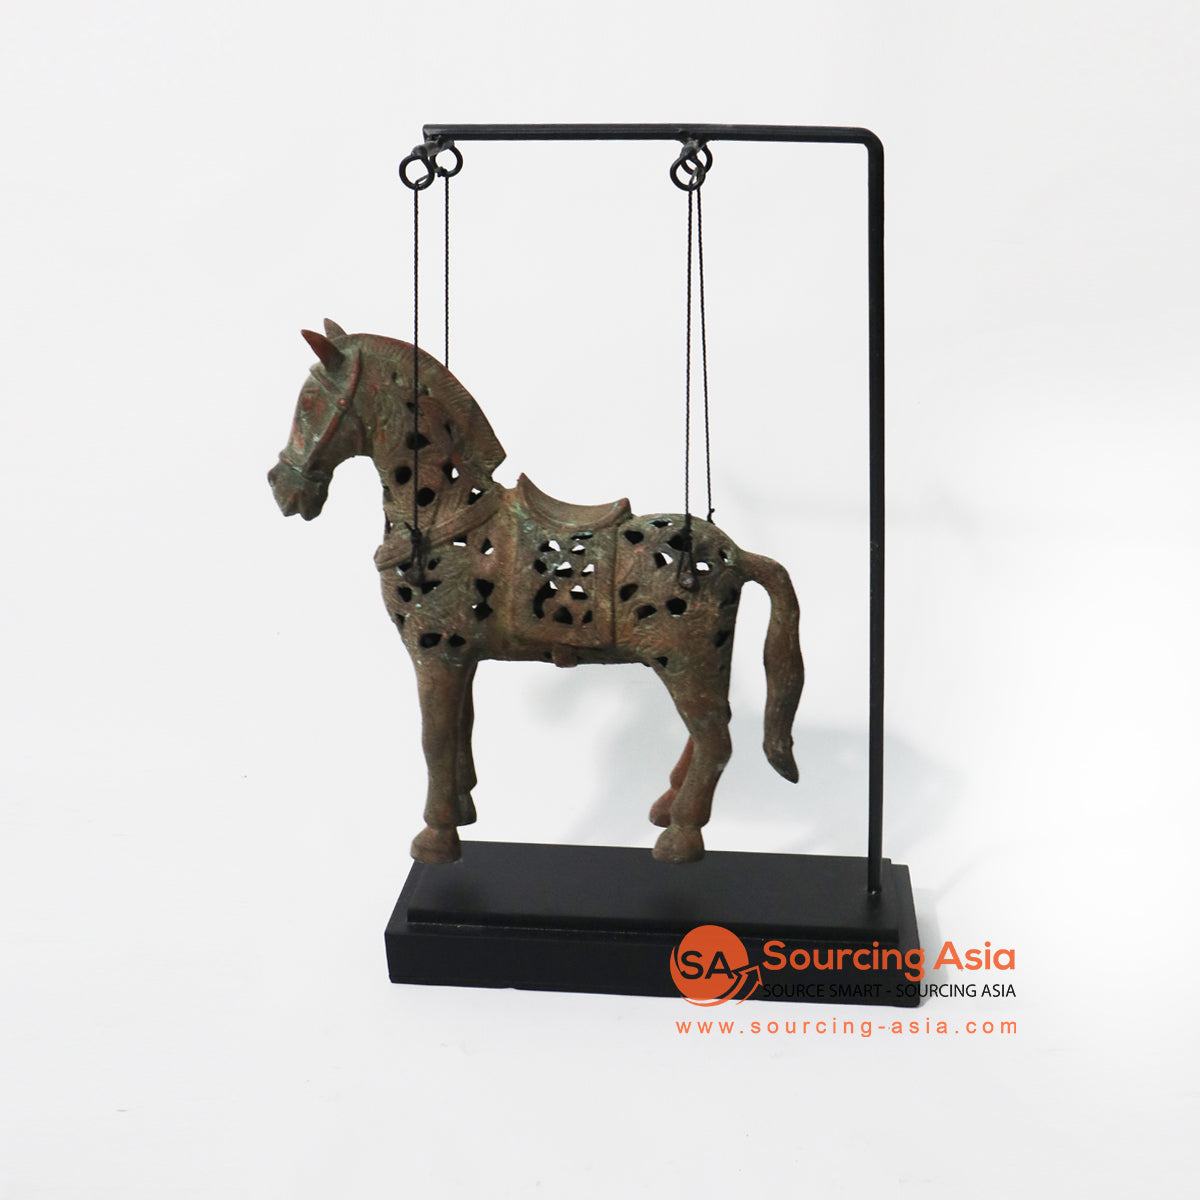 CAK003 ANTIQUE BRONZE HANGING HORSE ON STAND DECORATION